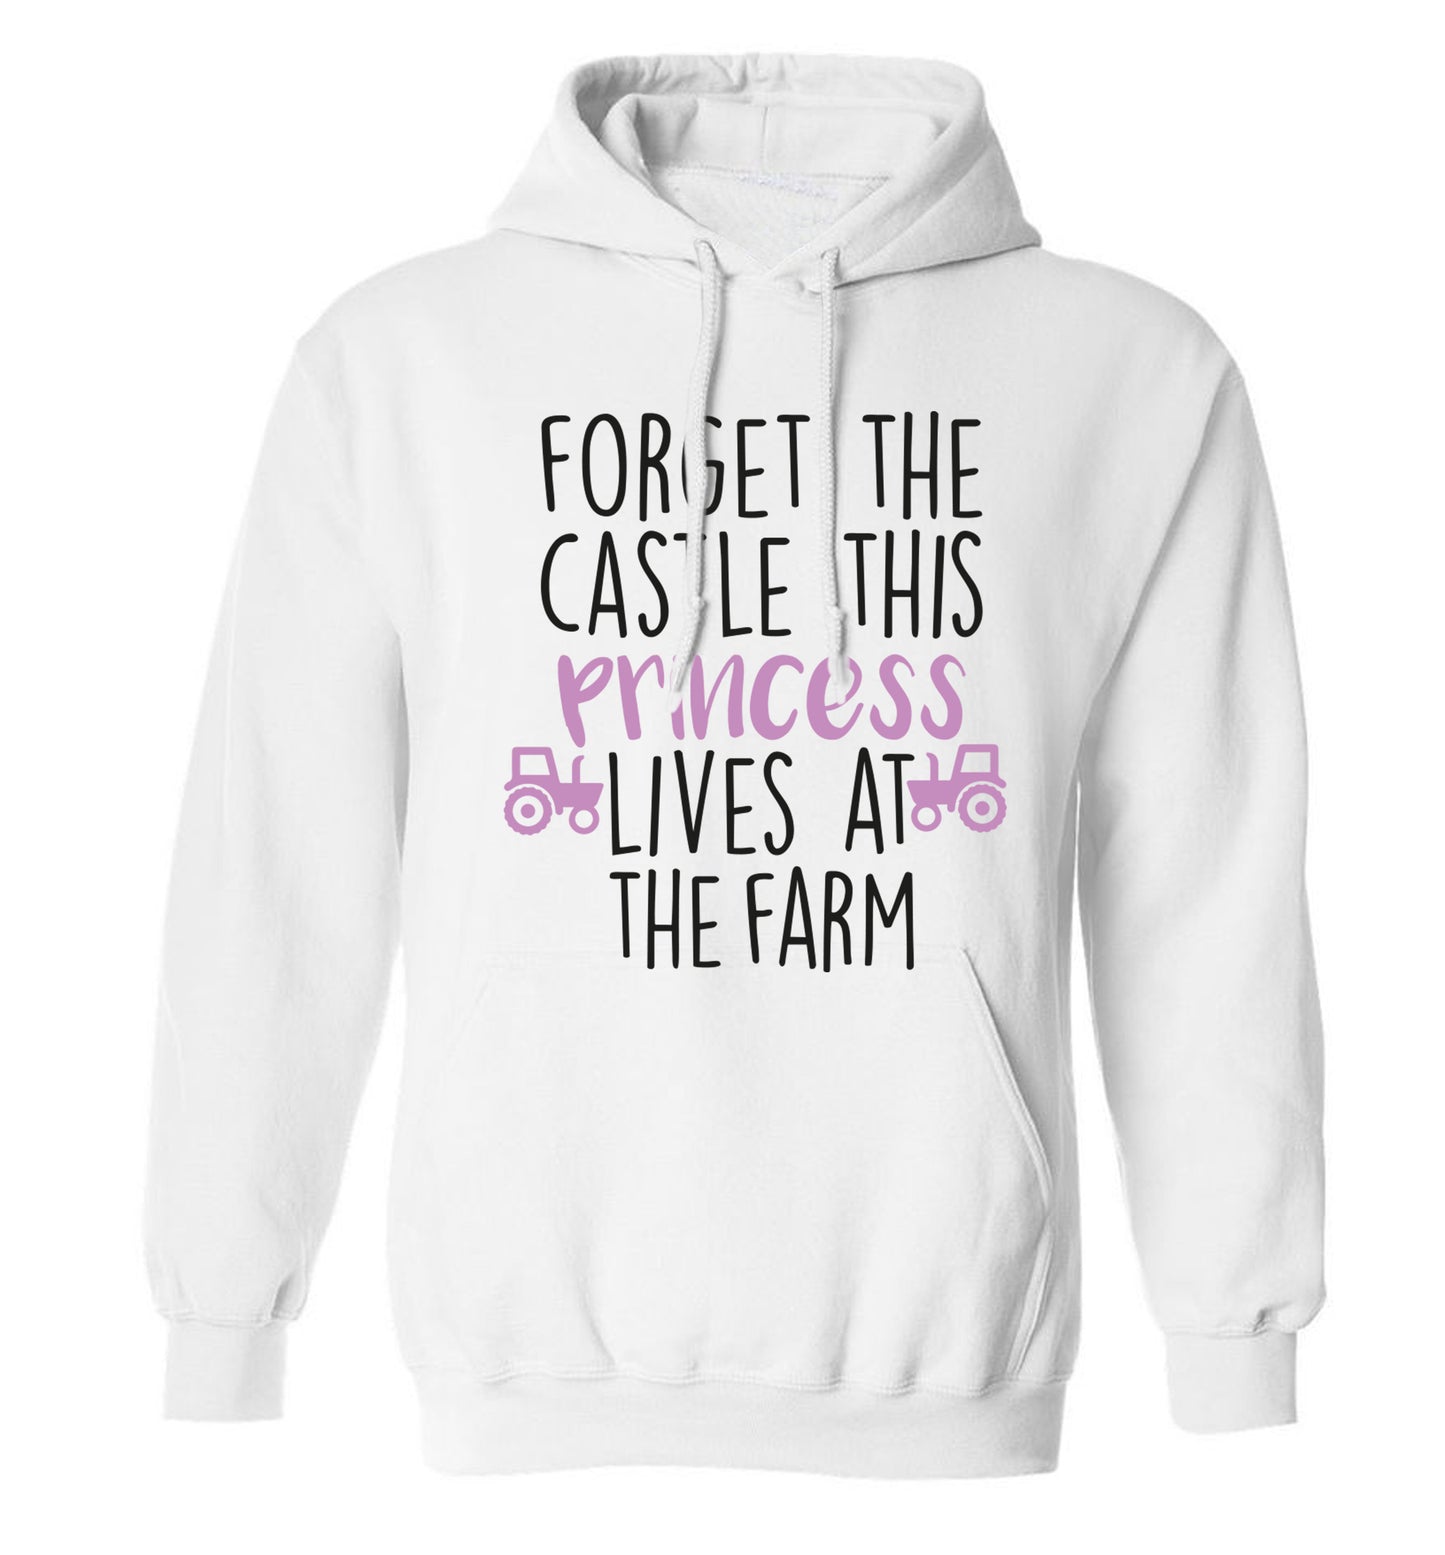 Forget the castle this princess lives at the farm adults unisex white hoodie 2XL